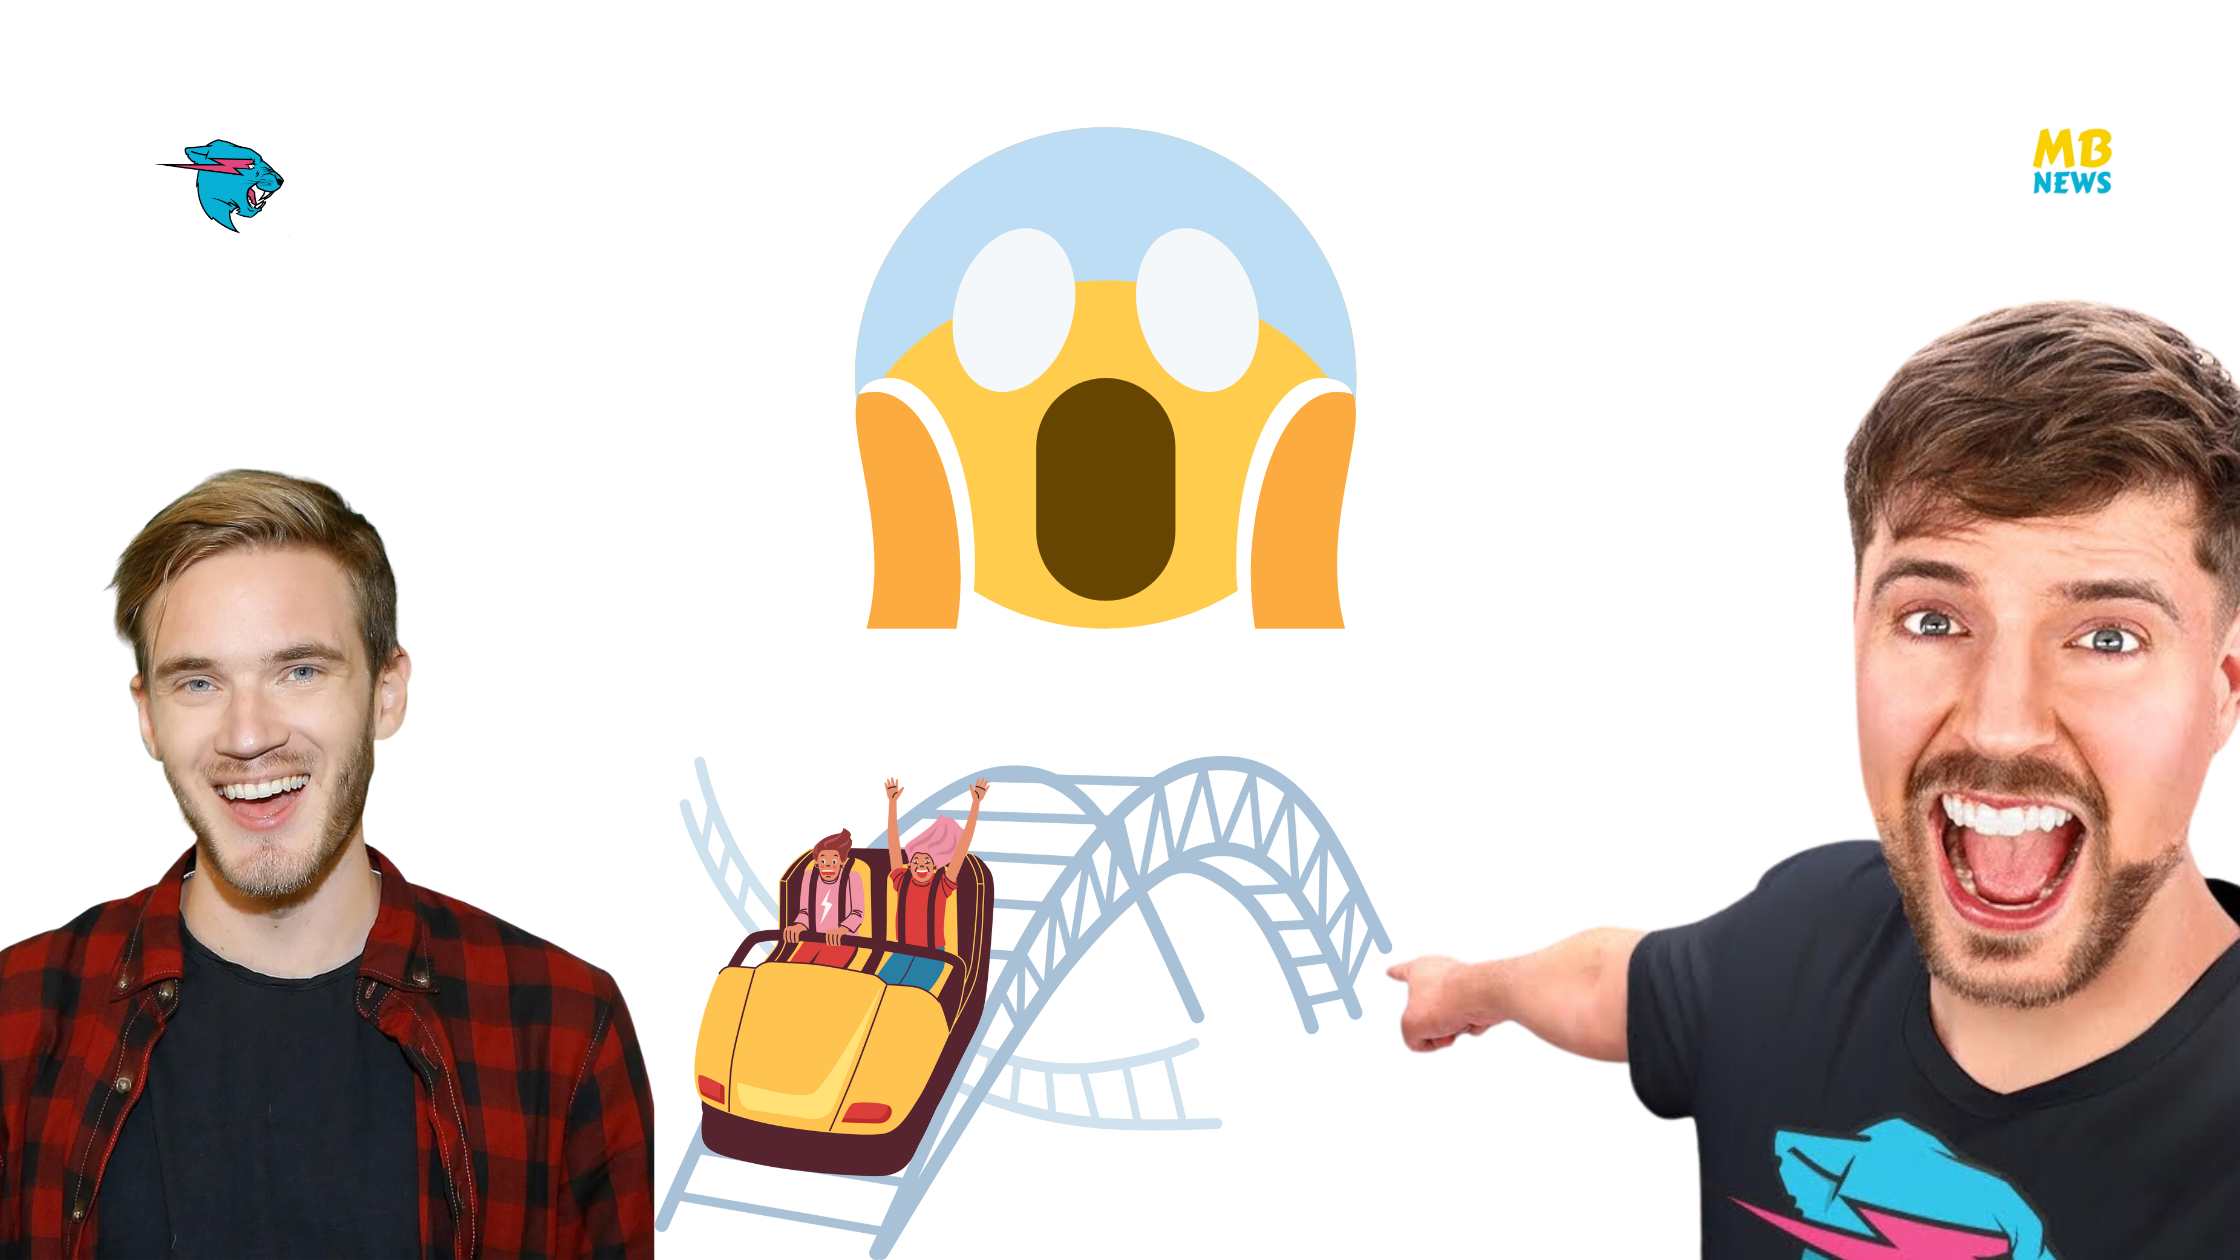 MrBeast Overcomes Steepest Roller Coaster Fear with PewDiePie in $250,000 Vacation Challenge in $"1 vs $250,000 Vacation"!